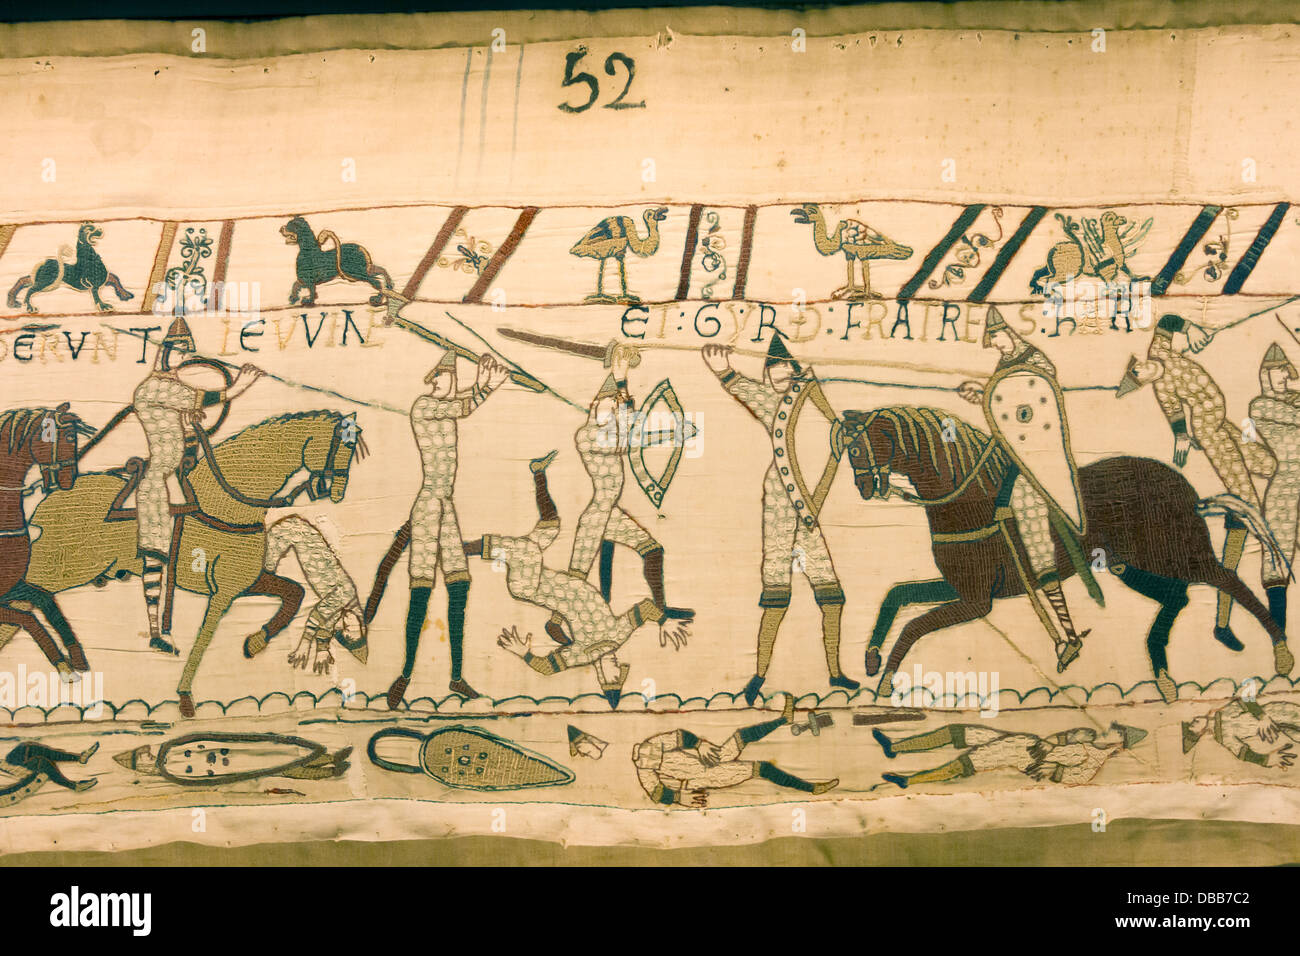 France Normandy, Bayeux, Tapestry panel 52, 'Here fall Leofwine & Gyrth brothers of King Harold' Stock Photo